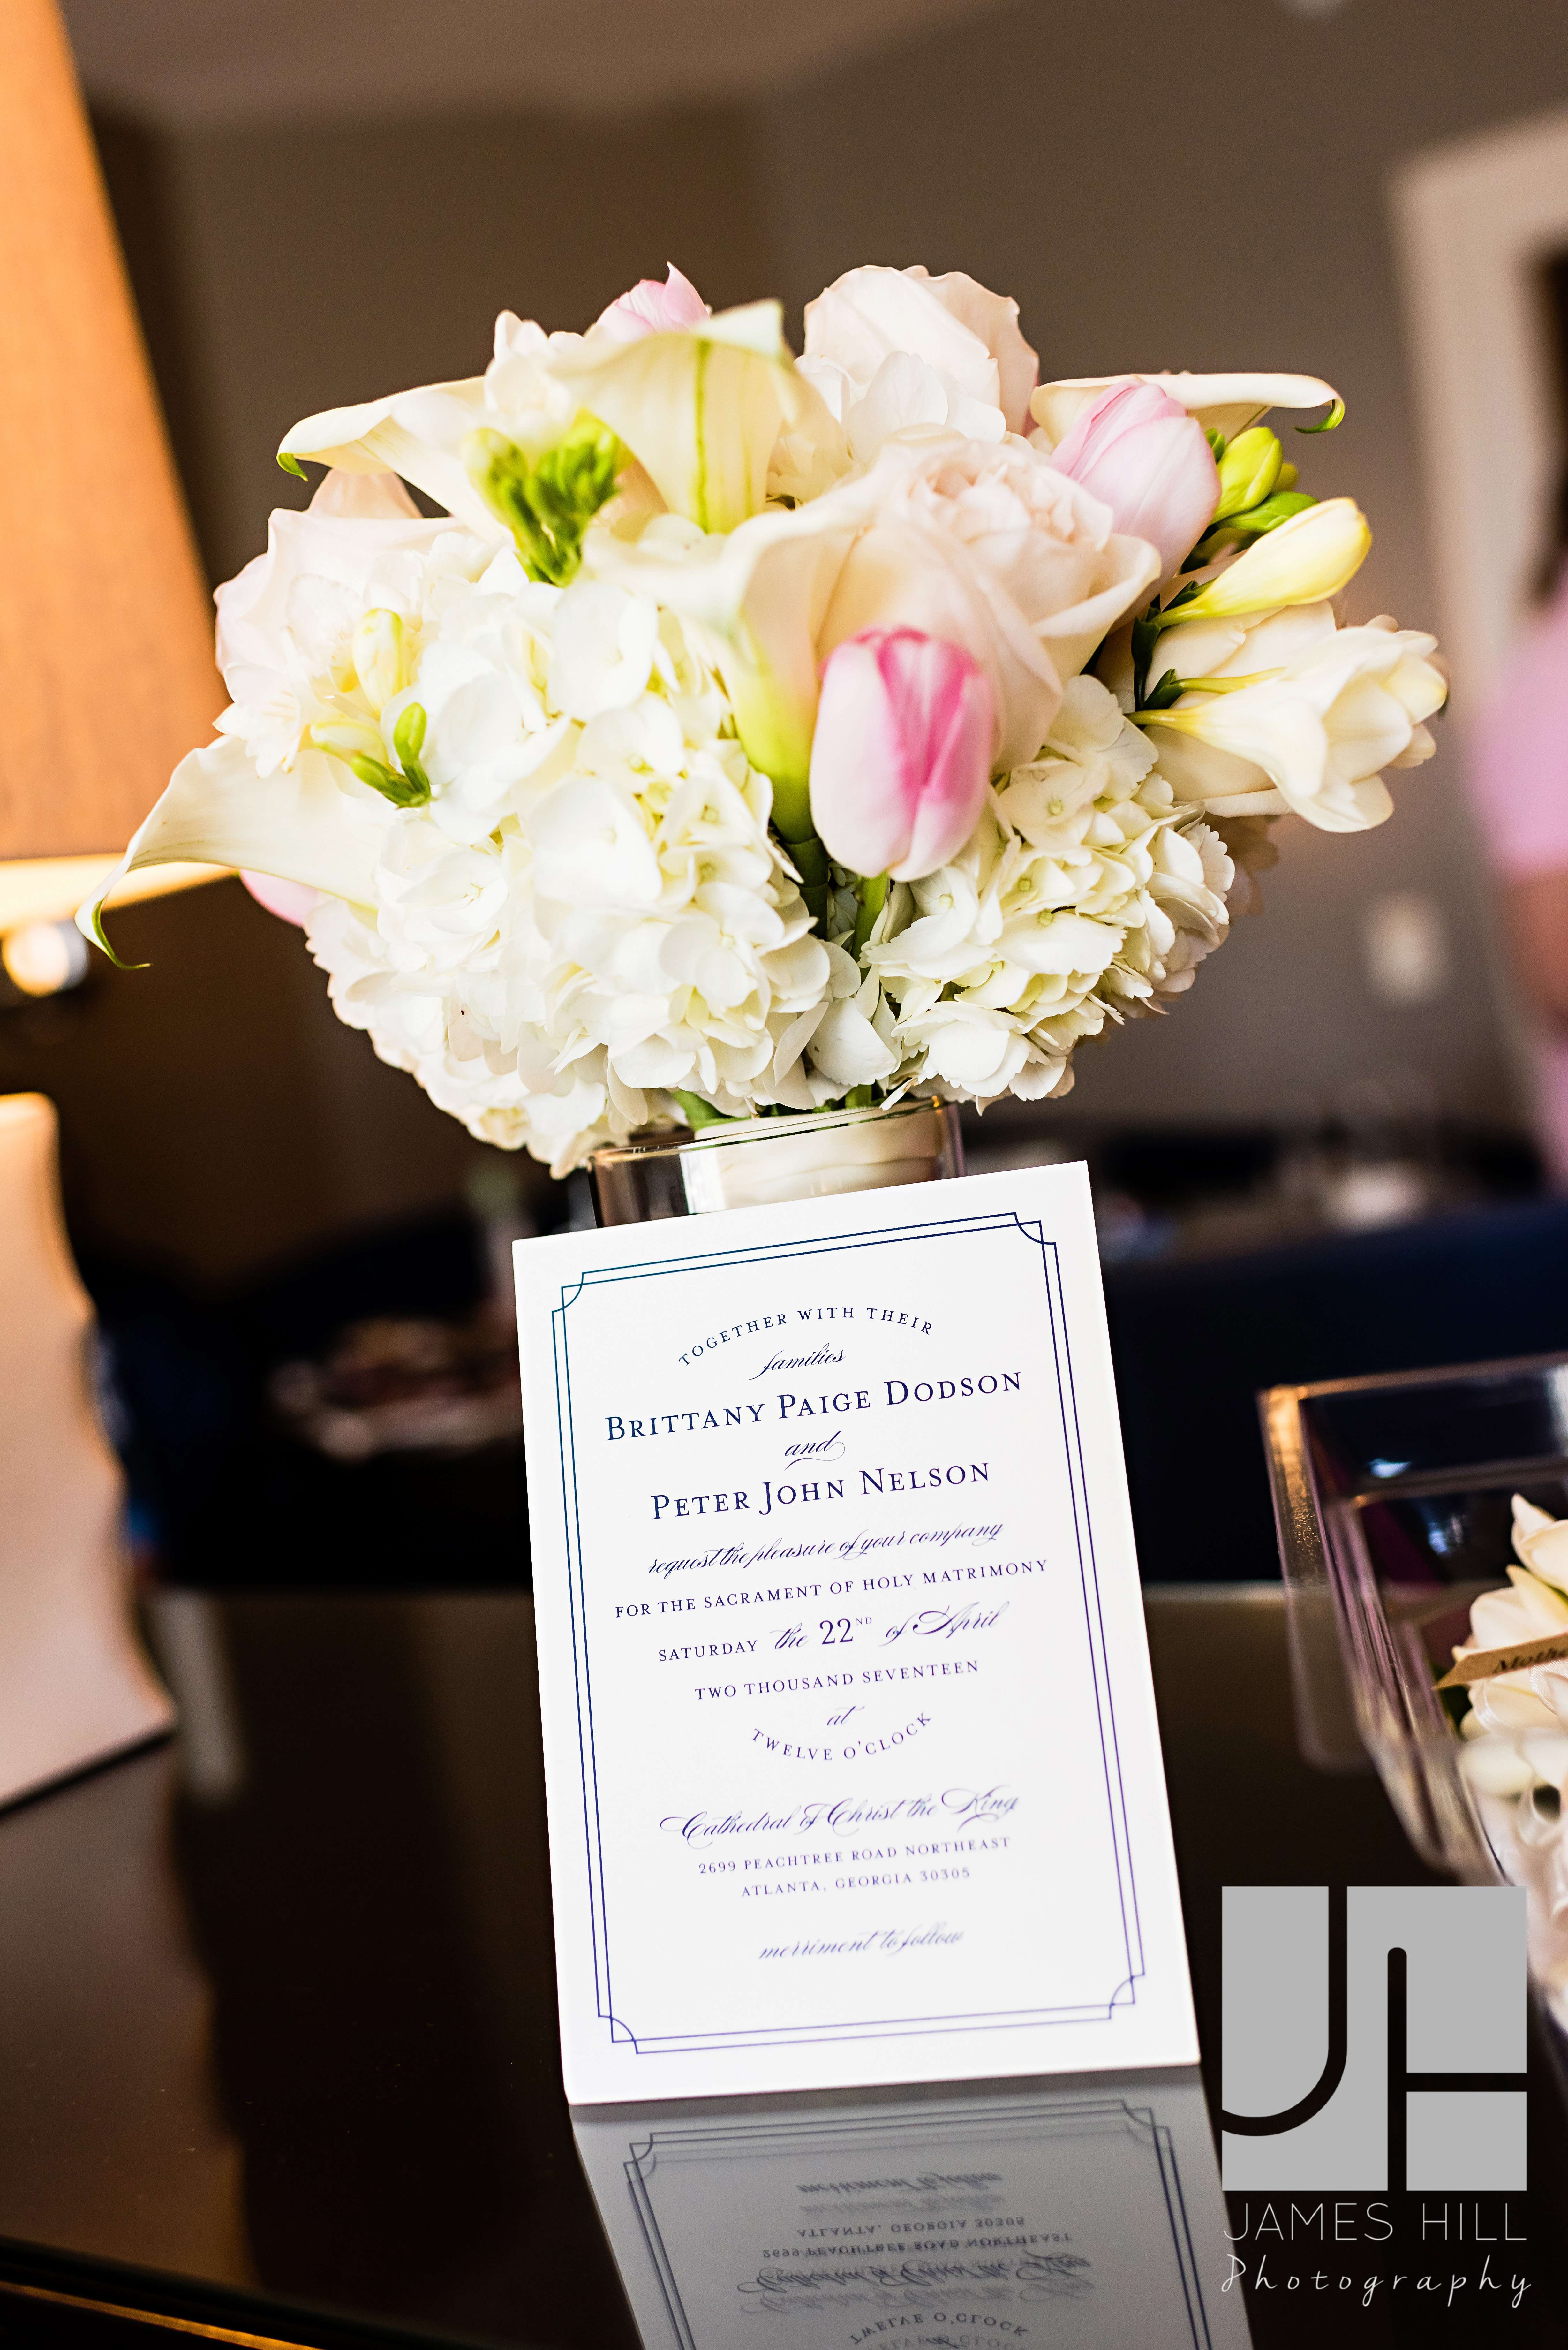 Love this gorgeous portrait of their flowers and invitation.